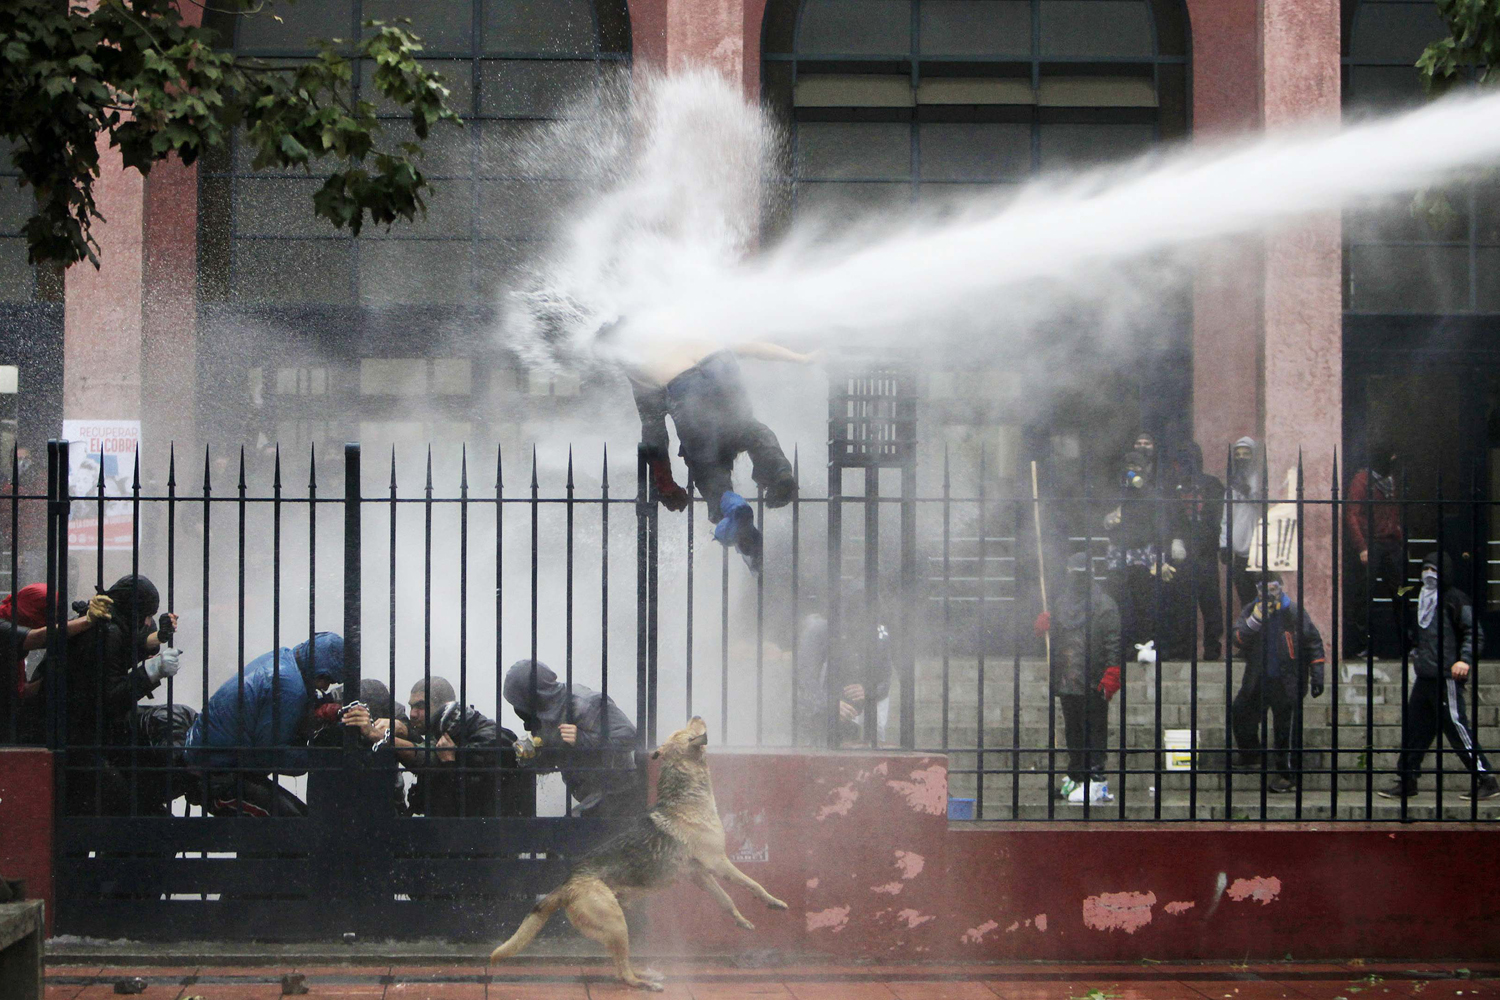 June 26, 2013. A student is hit by a jet of water sprayed by riot police during a protest against the government to demand changes in the public state education system, in Santiago.